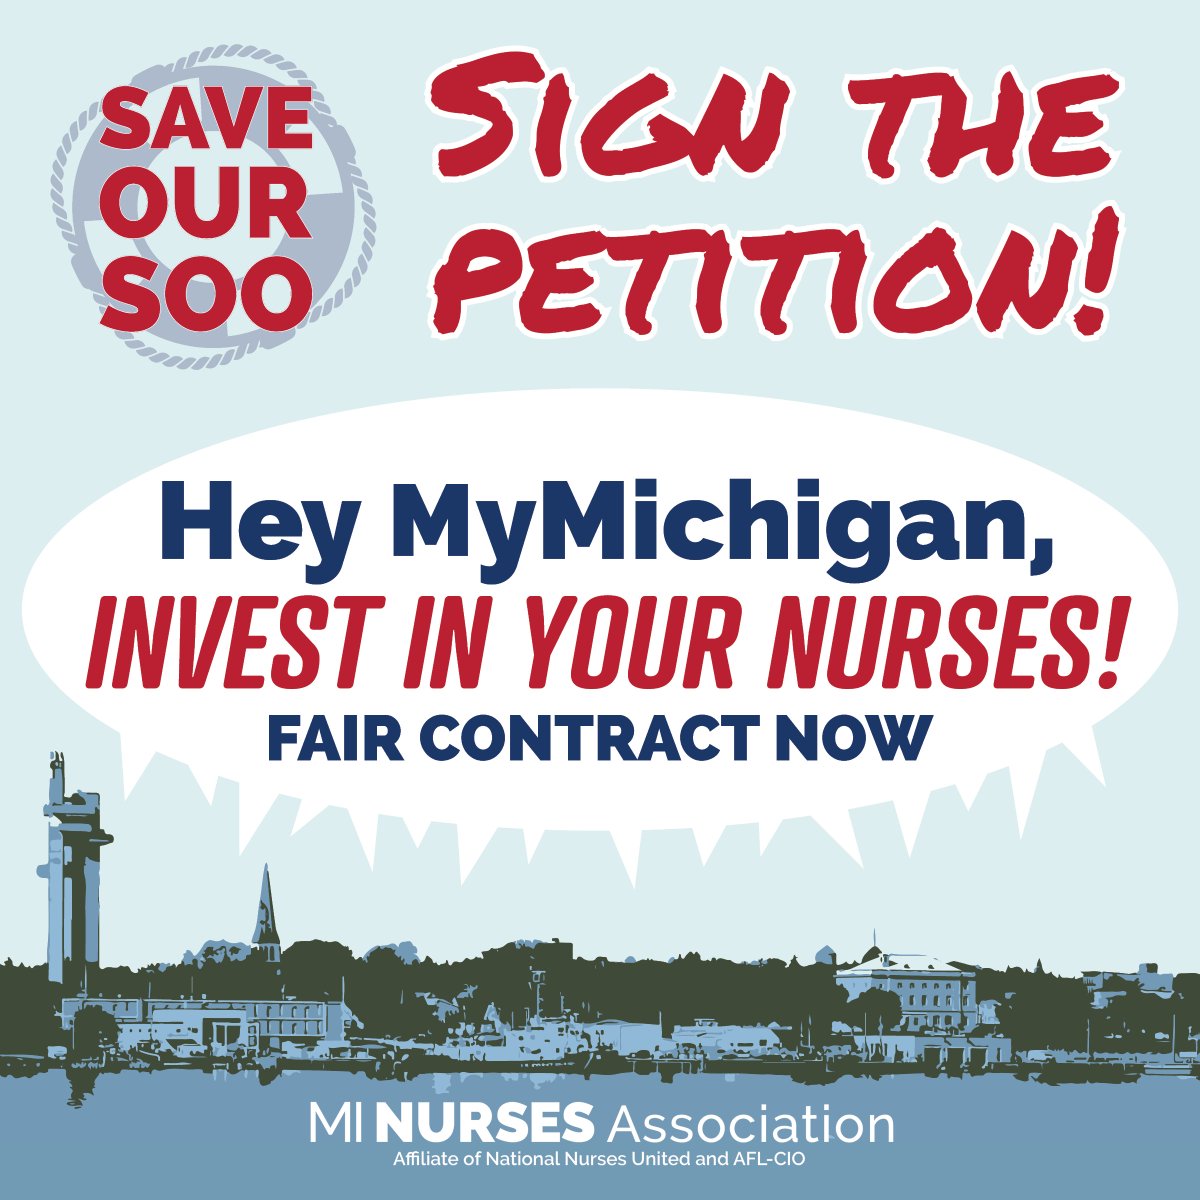 Sault Ste. Marie @mymichhealth #nurses want to provide the best care possible to their community. They need your help in their fight for a fair contract! Sign the petition at saveoursoo.com #safestaffingsaveslives #patientsoverprofits #unionstrong